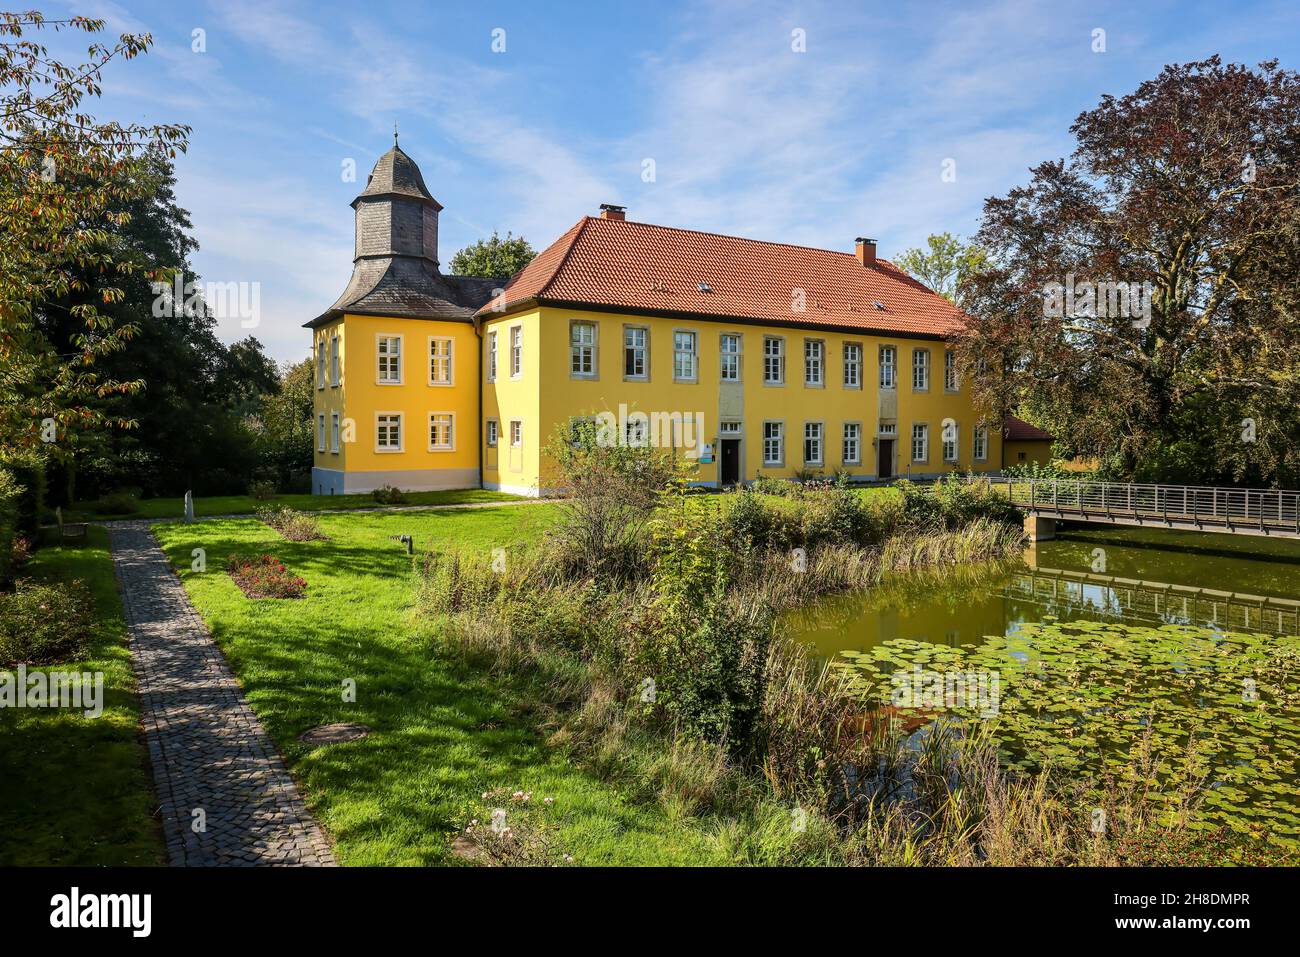 Datteln, North Rhine-Westphalia, Germany - Haus Vogelsang, the medieval moated castle is a former aristocratic residence on the Lippe River, today the Stock Photo